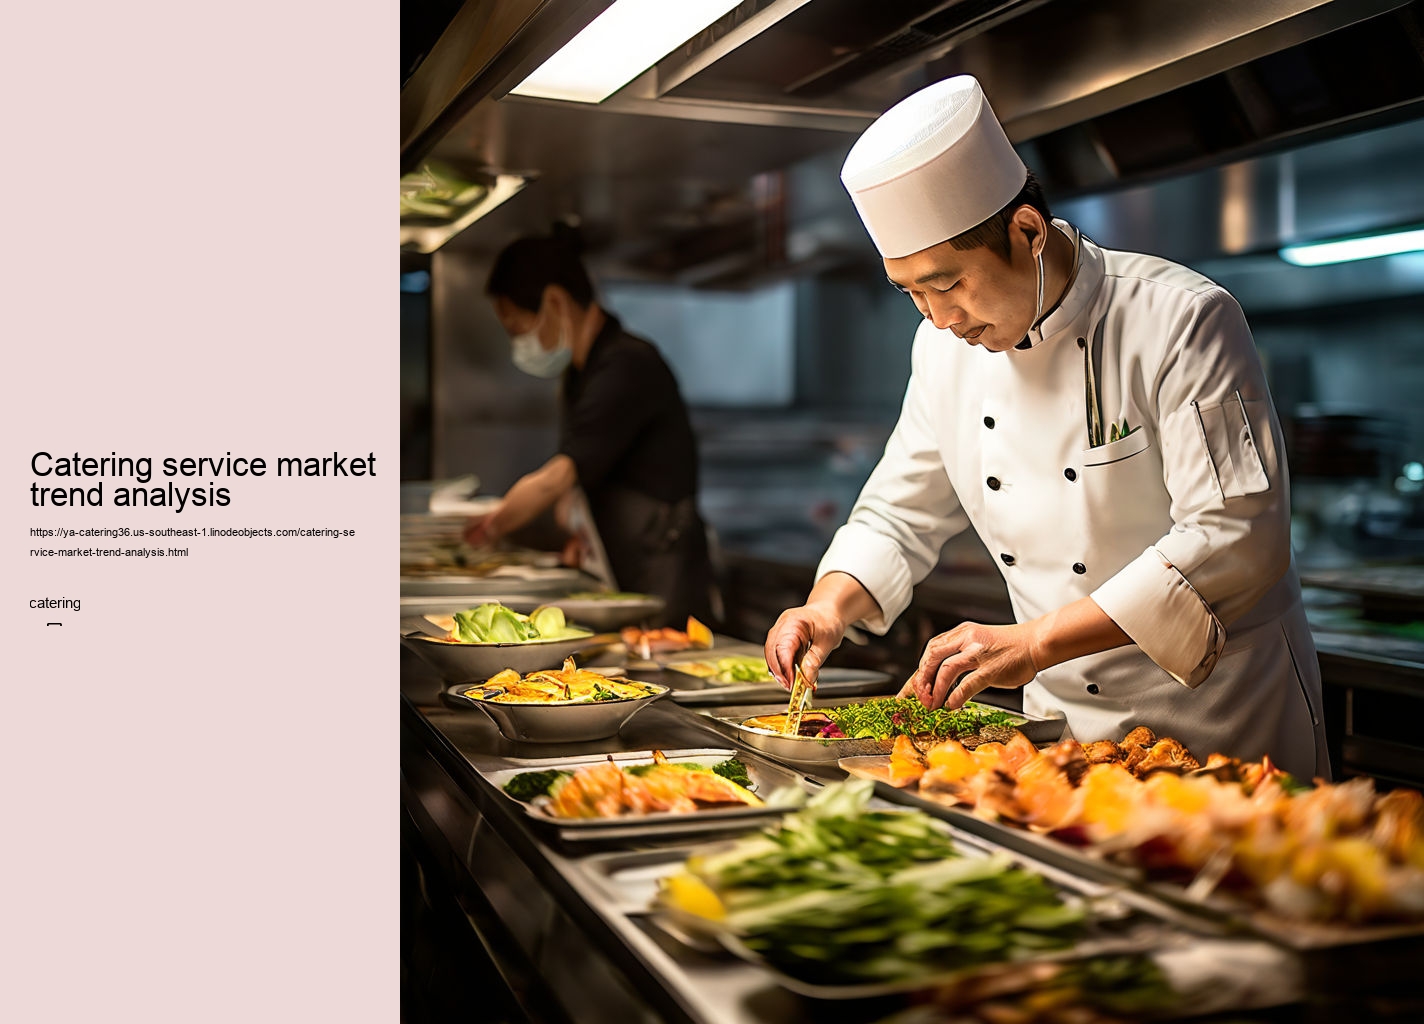 Catering service market trend analysis